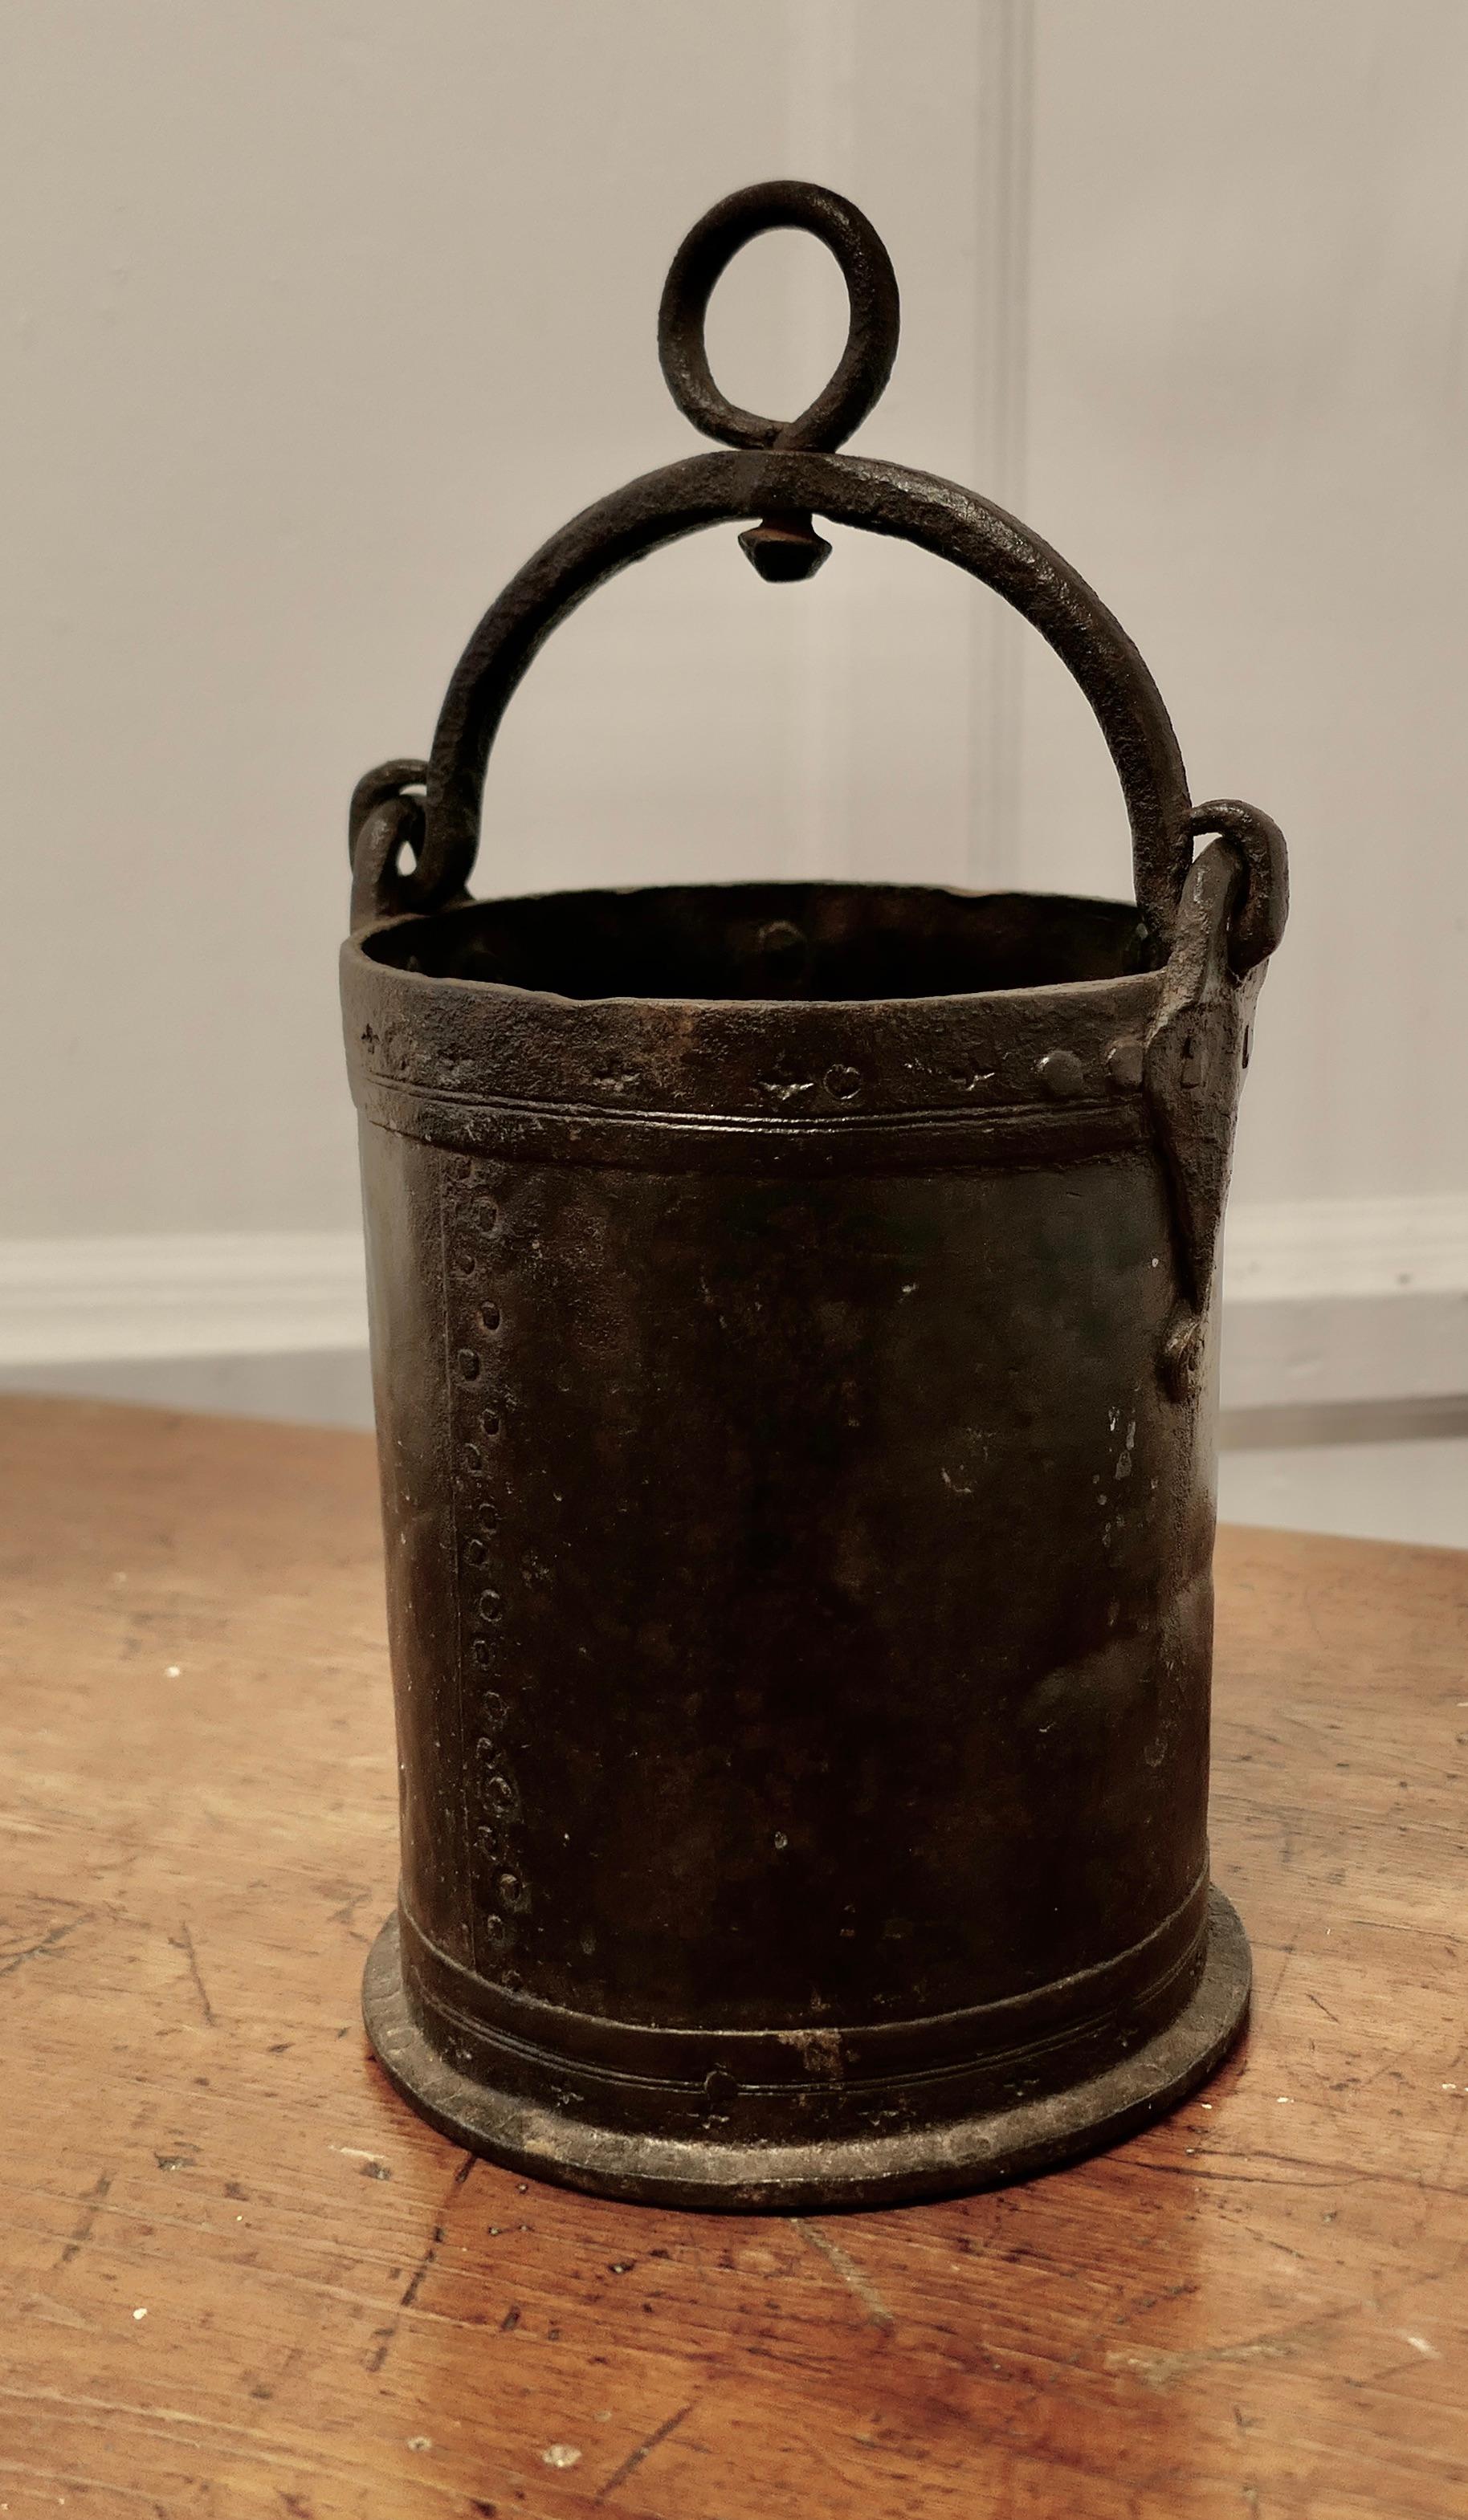 Heavy Iron Bucket.
This is a lovely small bucket, this charming piece has riveted construction and with a swing handle
The cauldron is in good well aged condition, it is 7” in diameter and 9” high not including the handle
MS178.